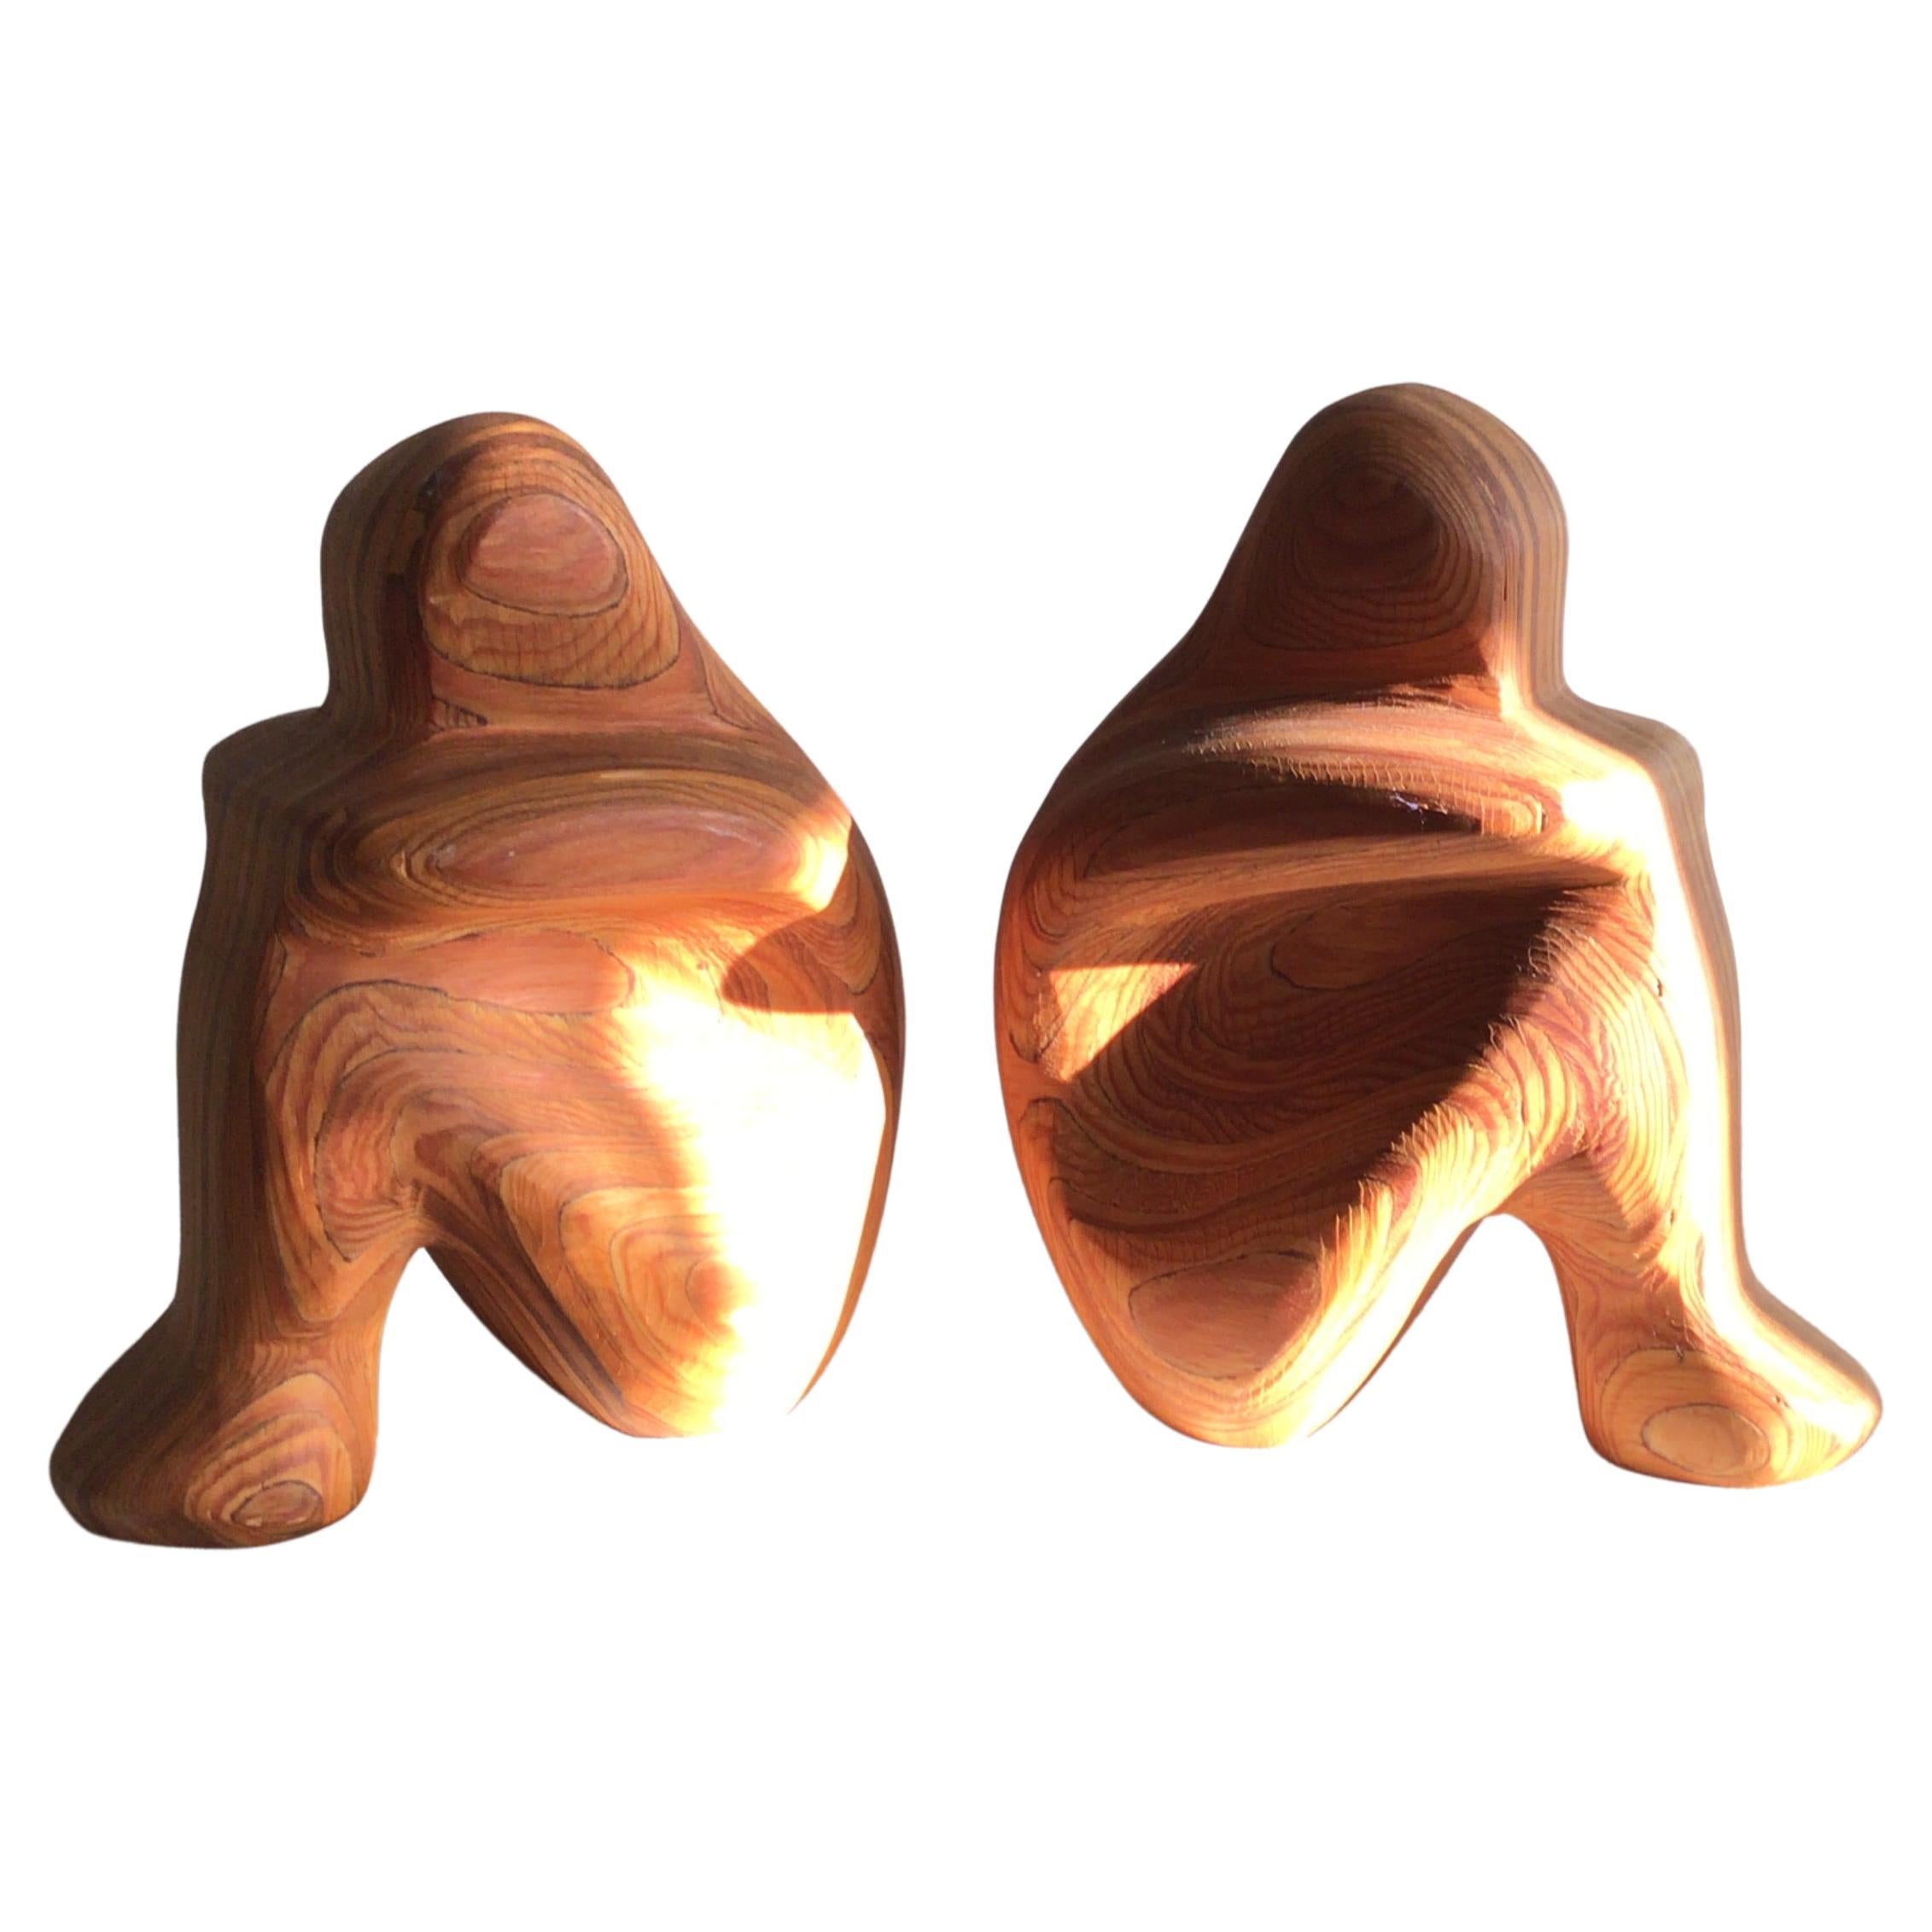 1980s Swirled Wood Sculptural Bookends For Sale